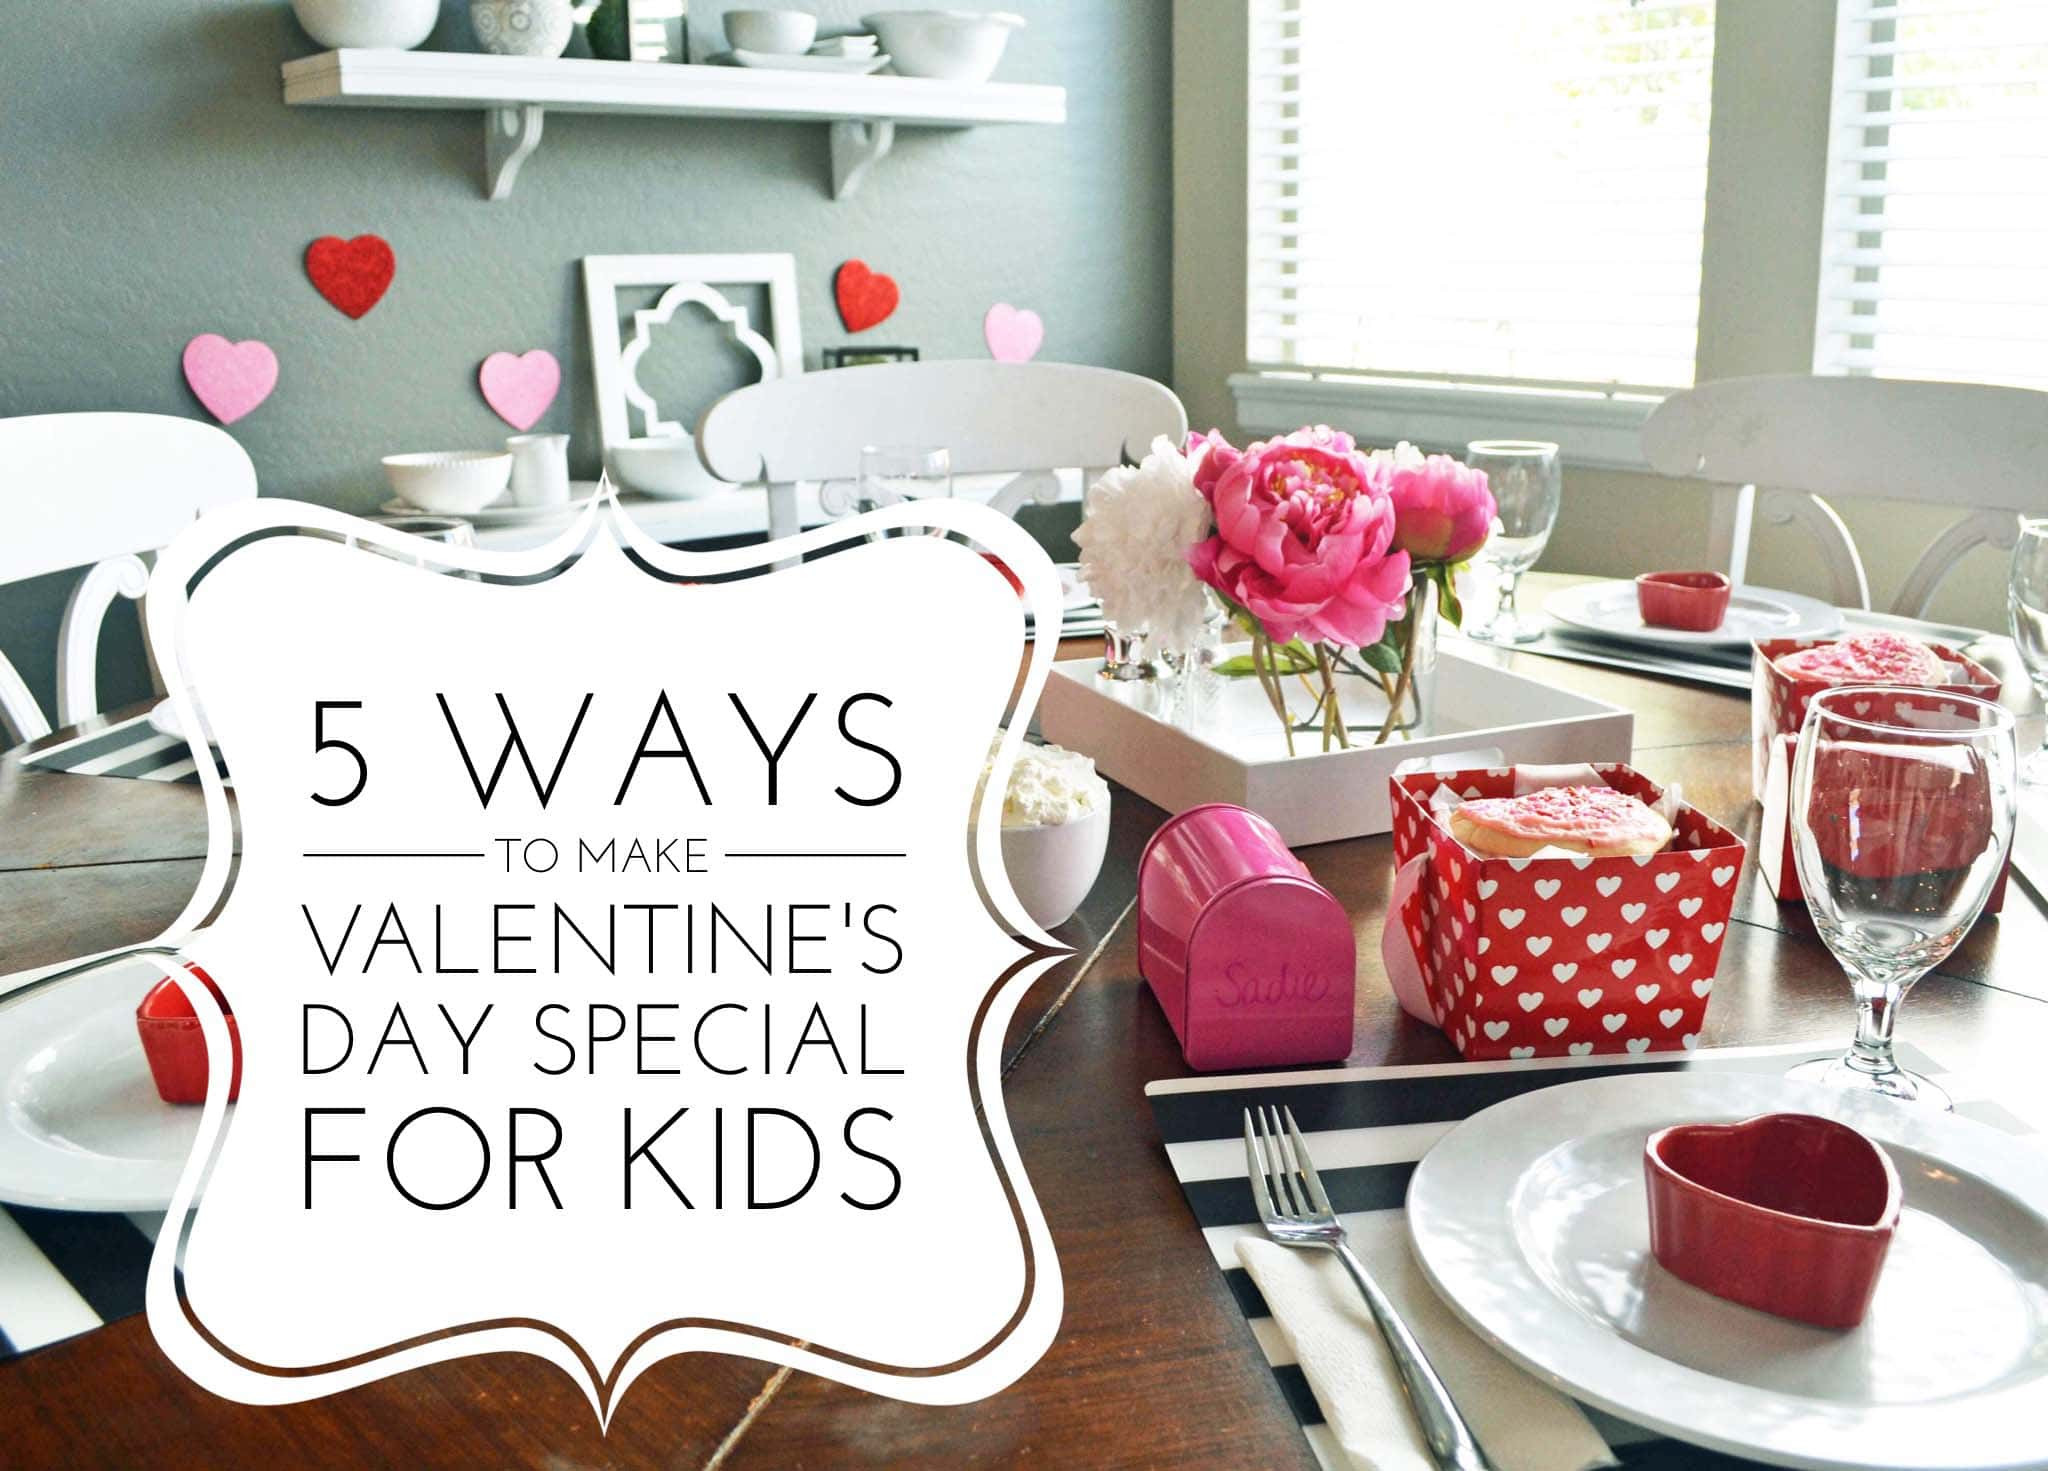 Valentines Day Ideas For Kids
 5 Ways to Make Valentine s Day Special for Kids